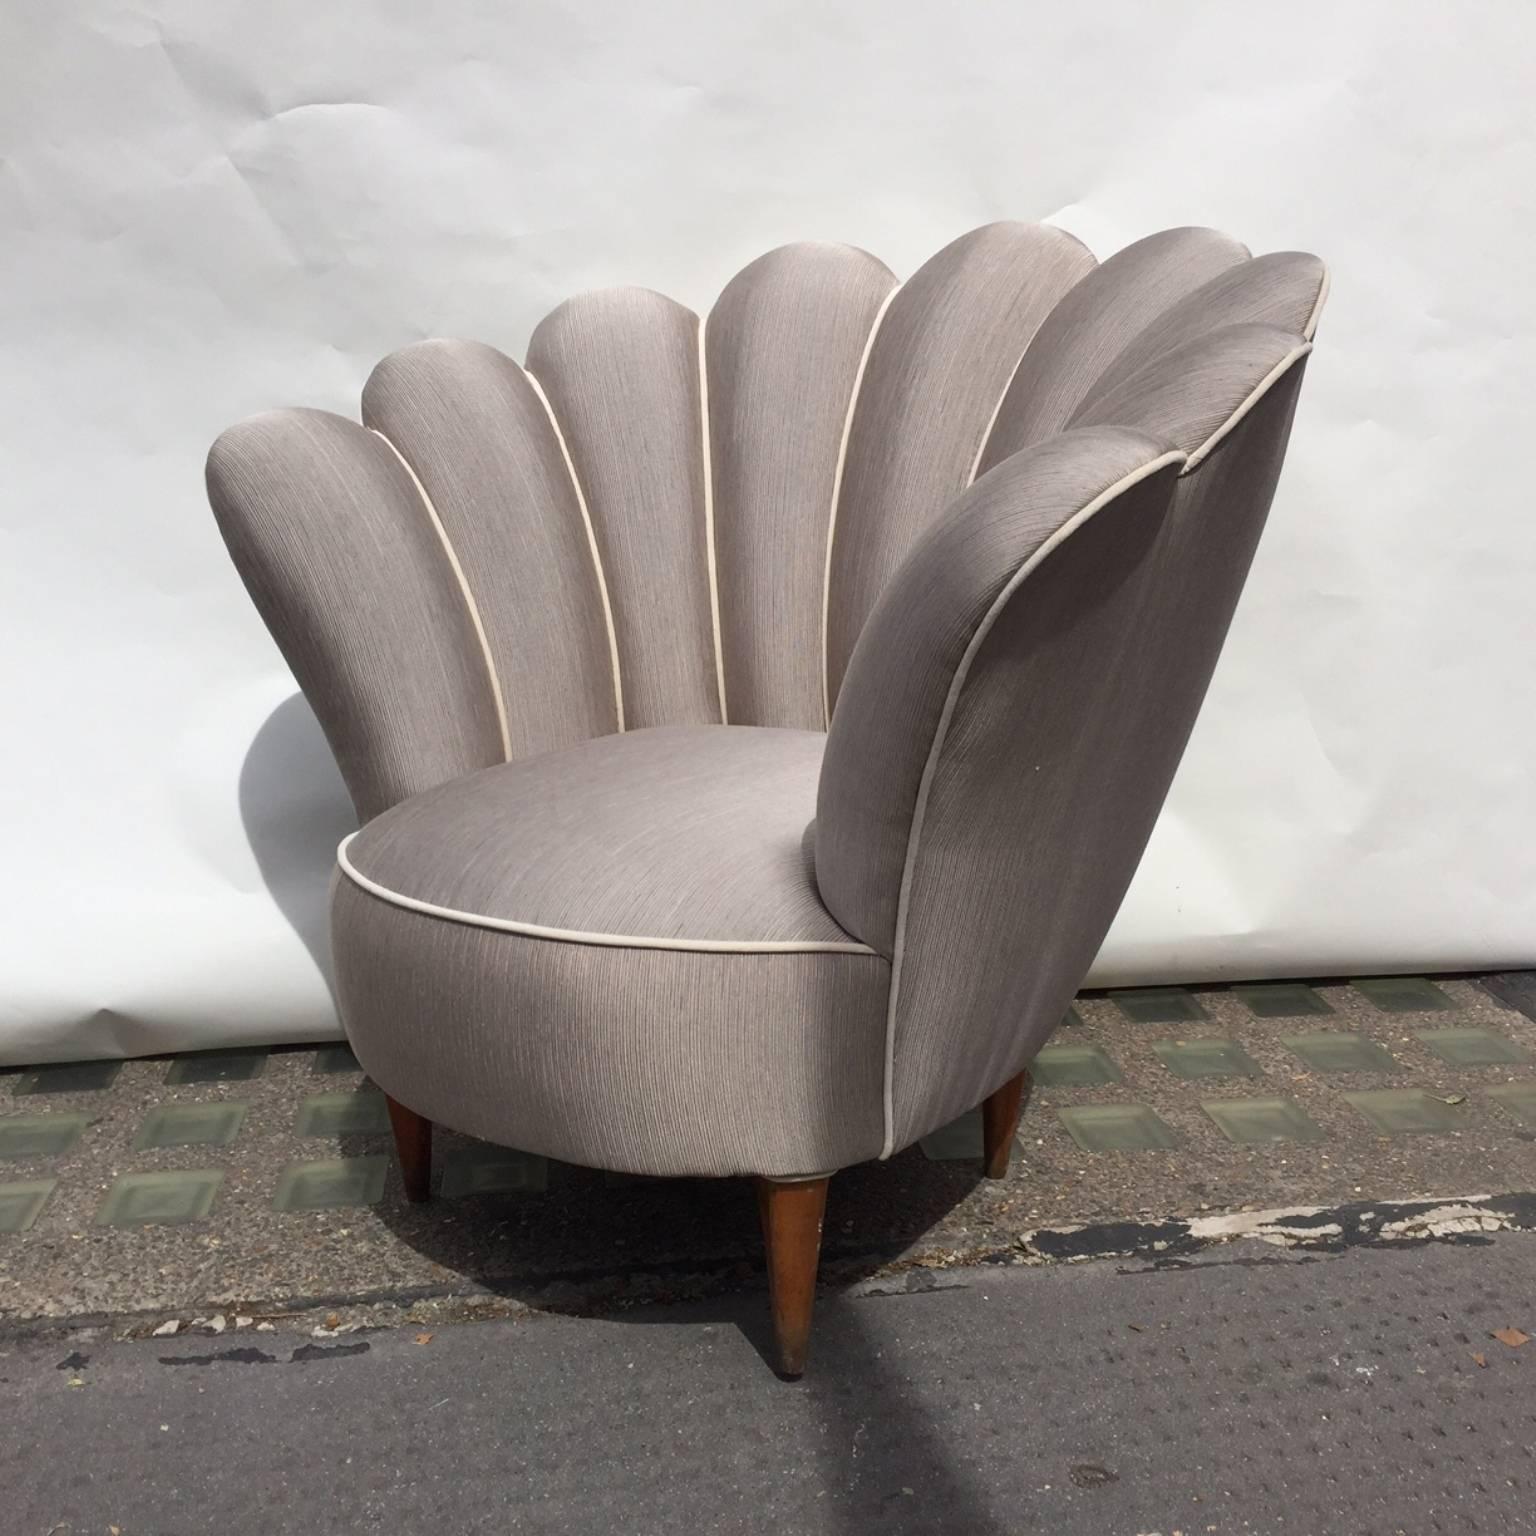 Pair of beautiful armchairs in the shape of the flower,
reupholstered in gray fabric and white piping with a wooden feet, 
Italian, circa 1950s.